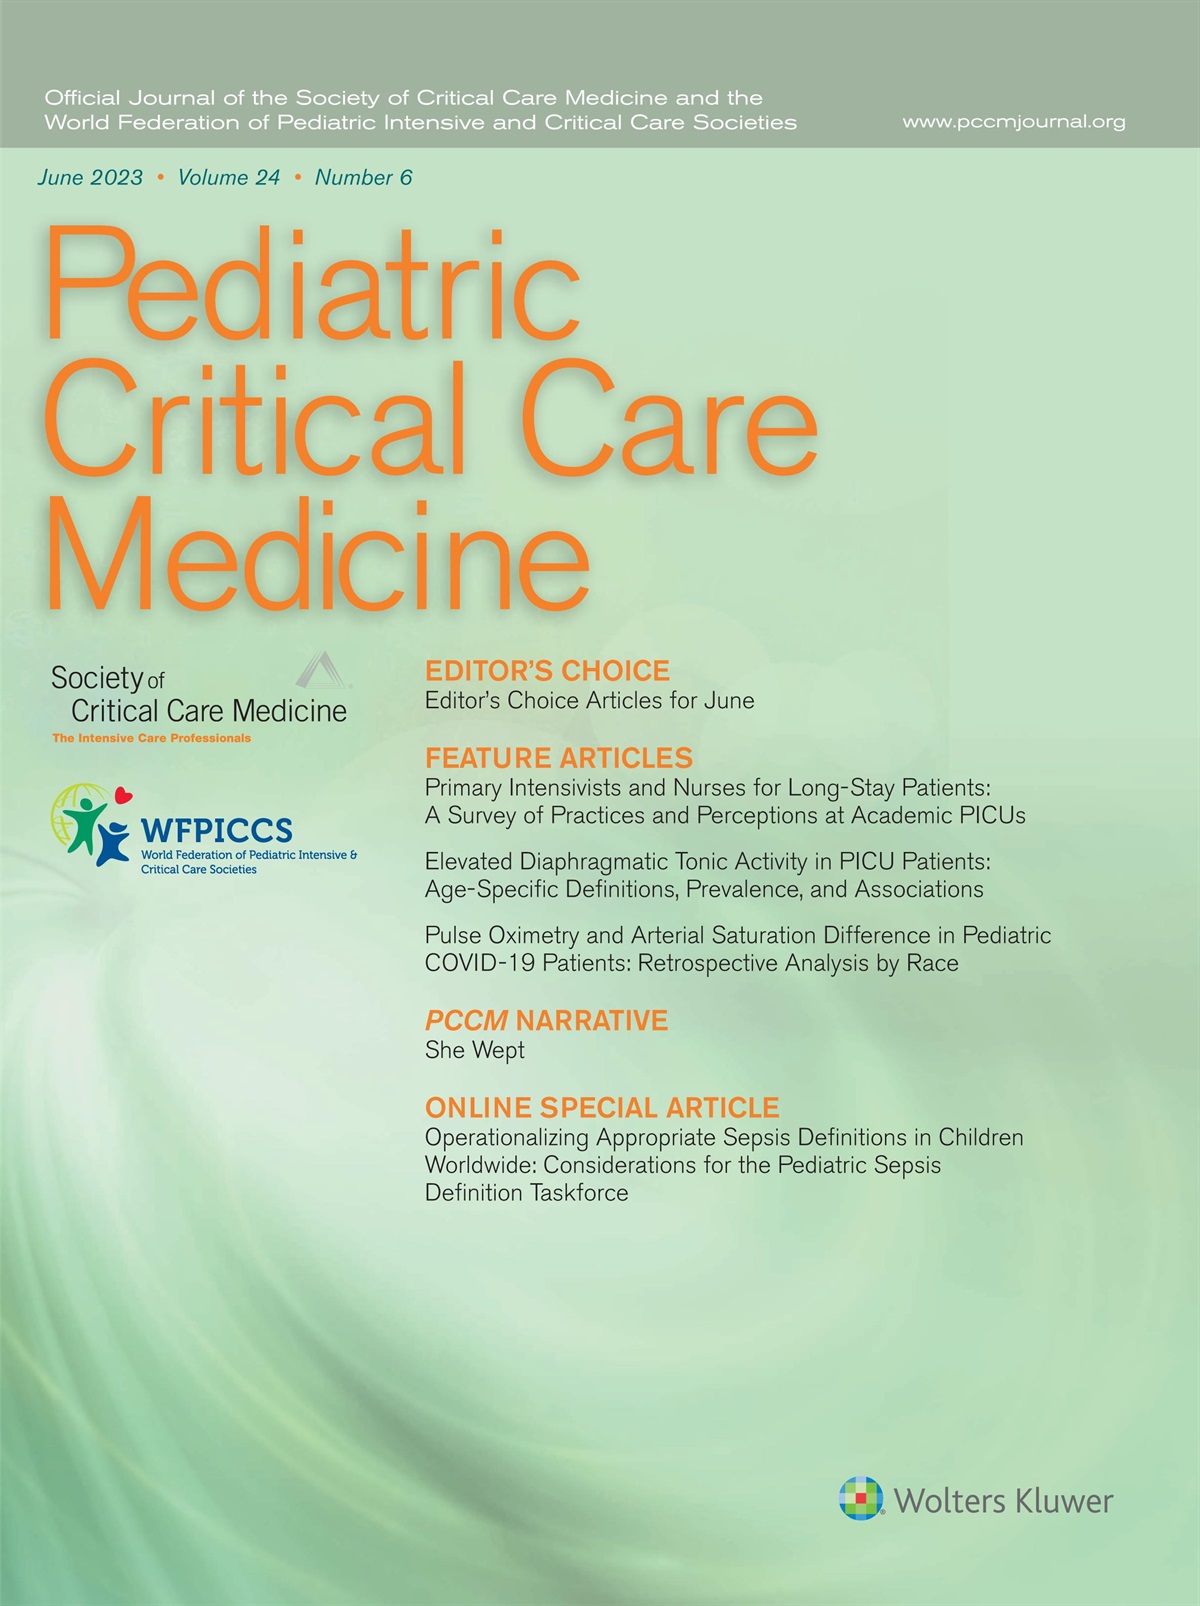 Pediatric Intensive Care Development When Resources Are Scarce and Demand Is Potentially Very High*